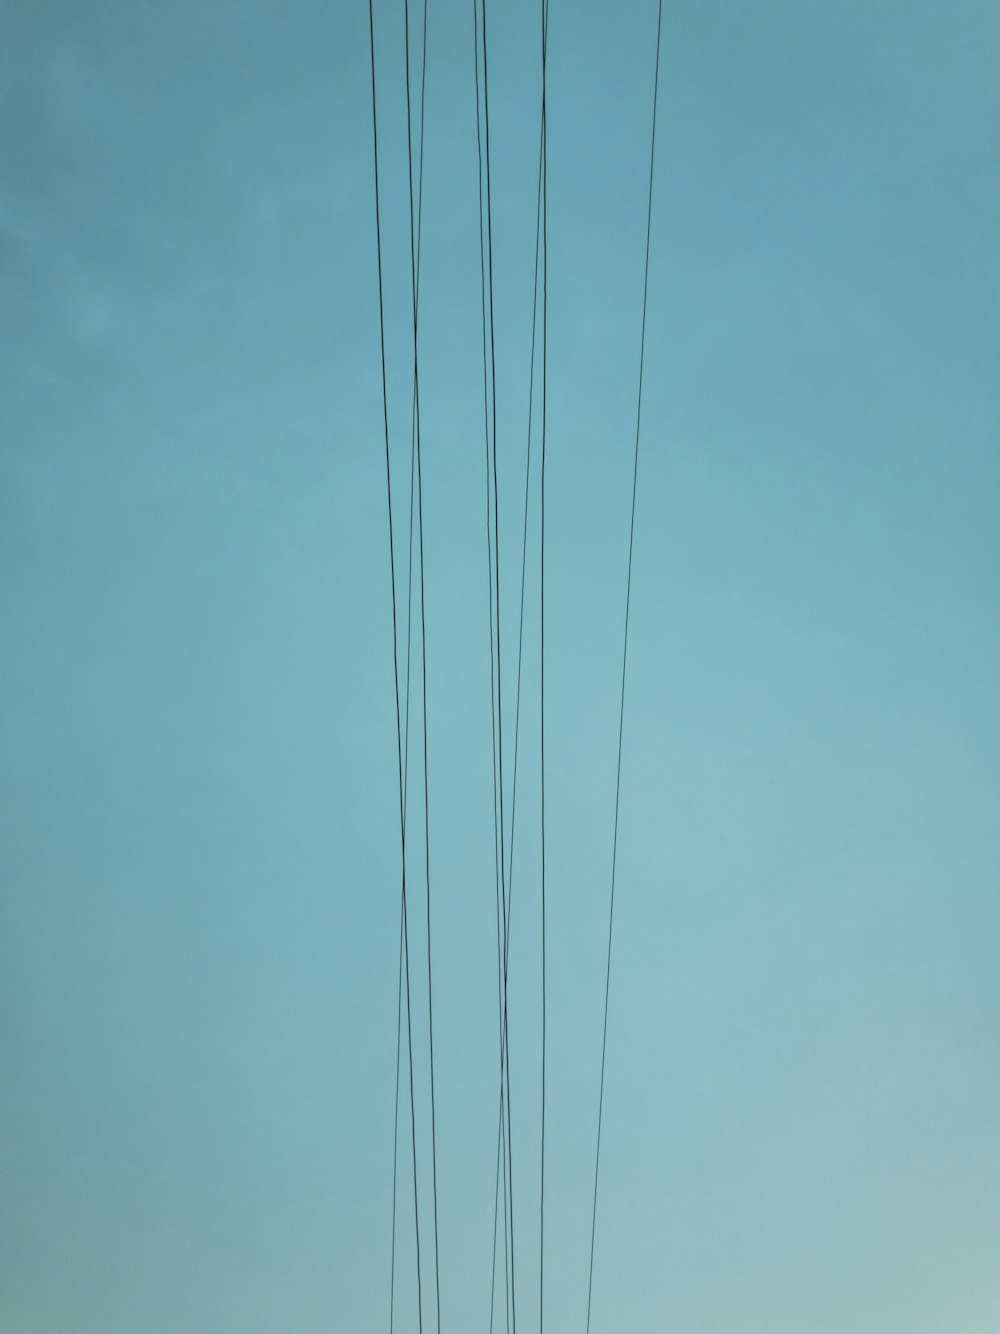 several cables under clear green sky